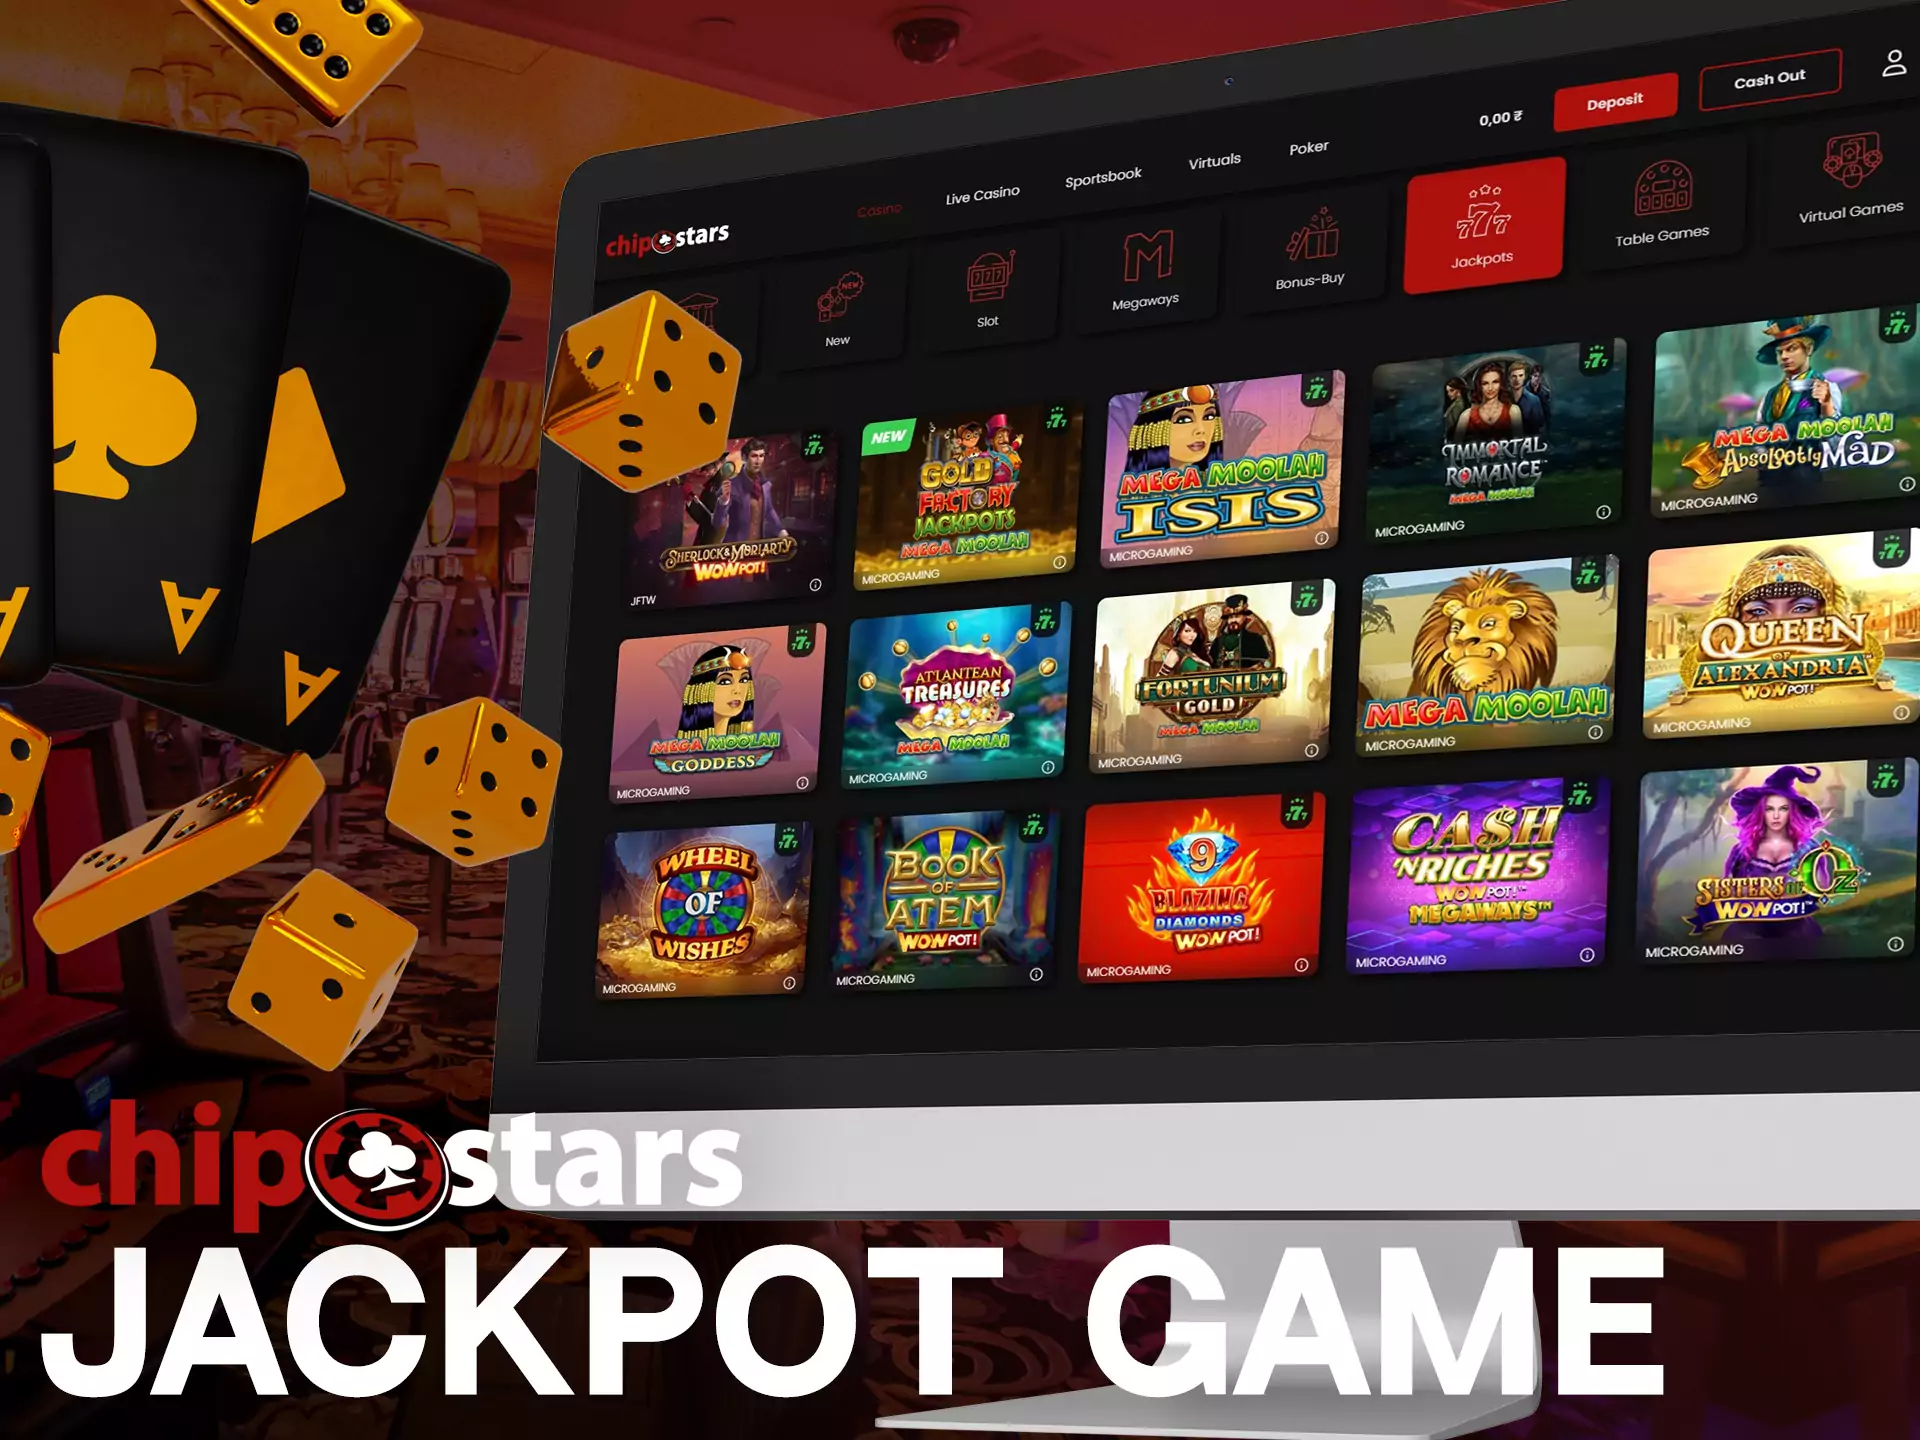 You can play jackpot games in the Chipstars Casino.